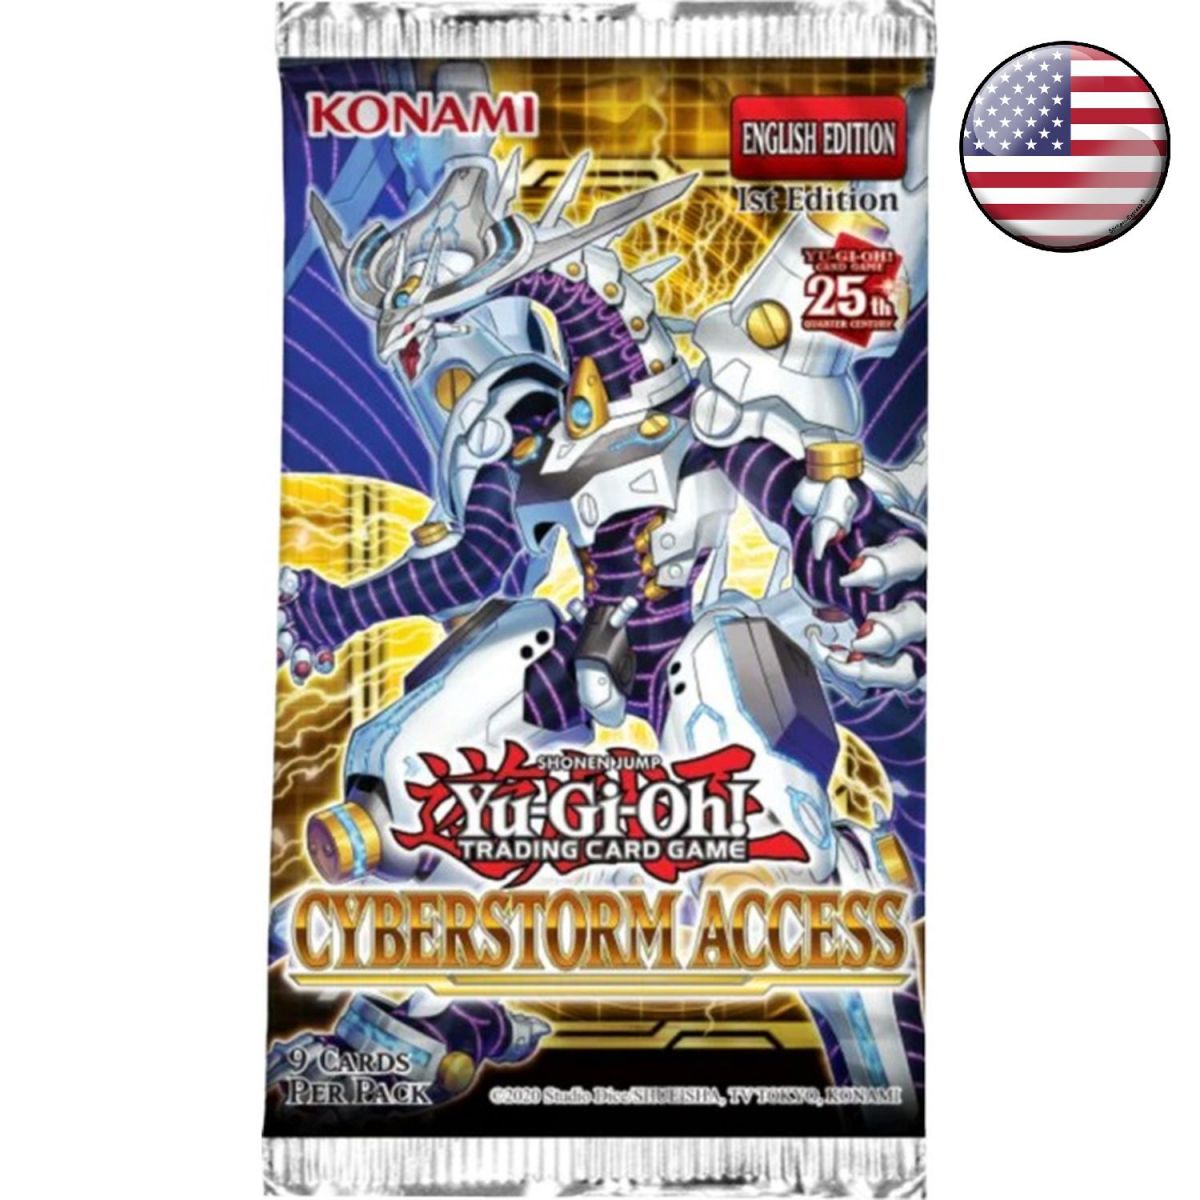 Item *US Print SEALED* Yu-Gi-Oh! - Booster - Cyberstorm Access - AMERICAIN